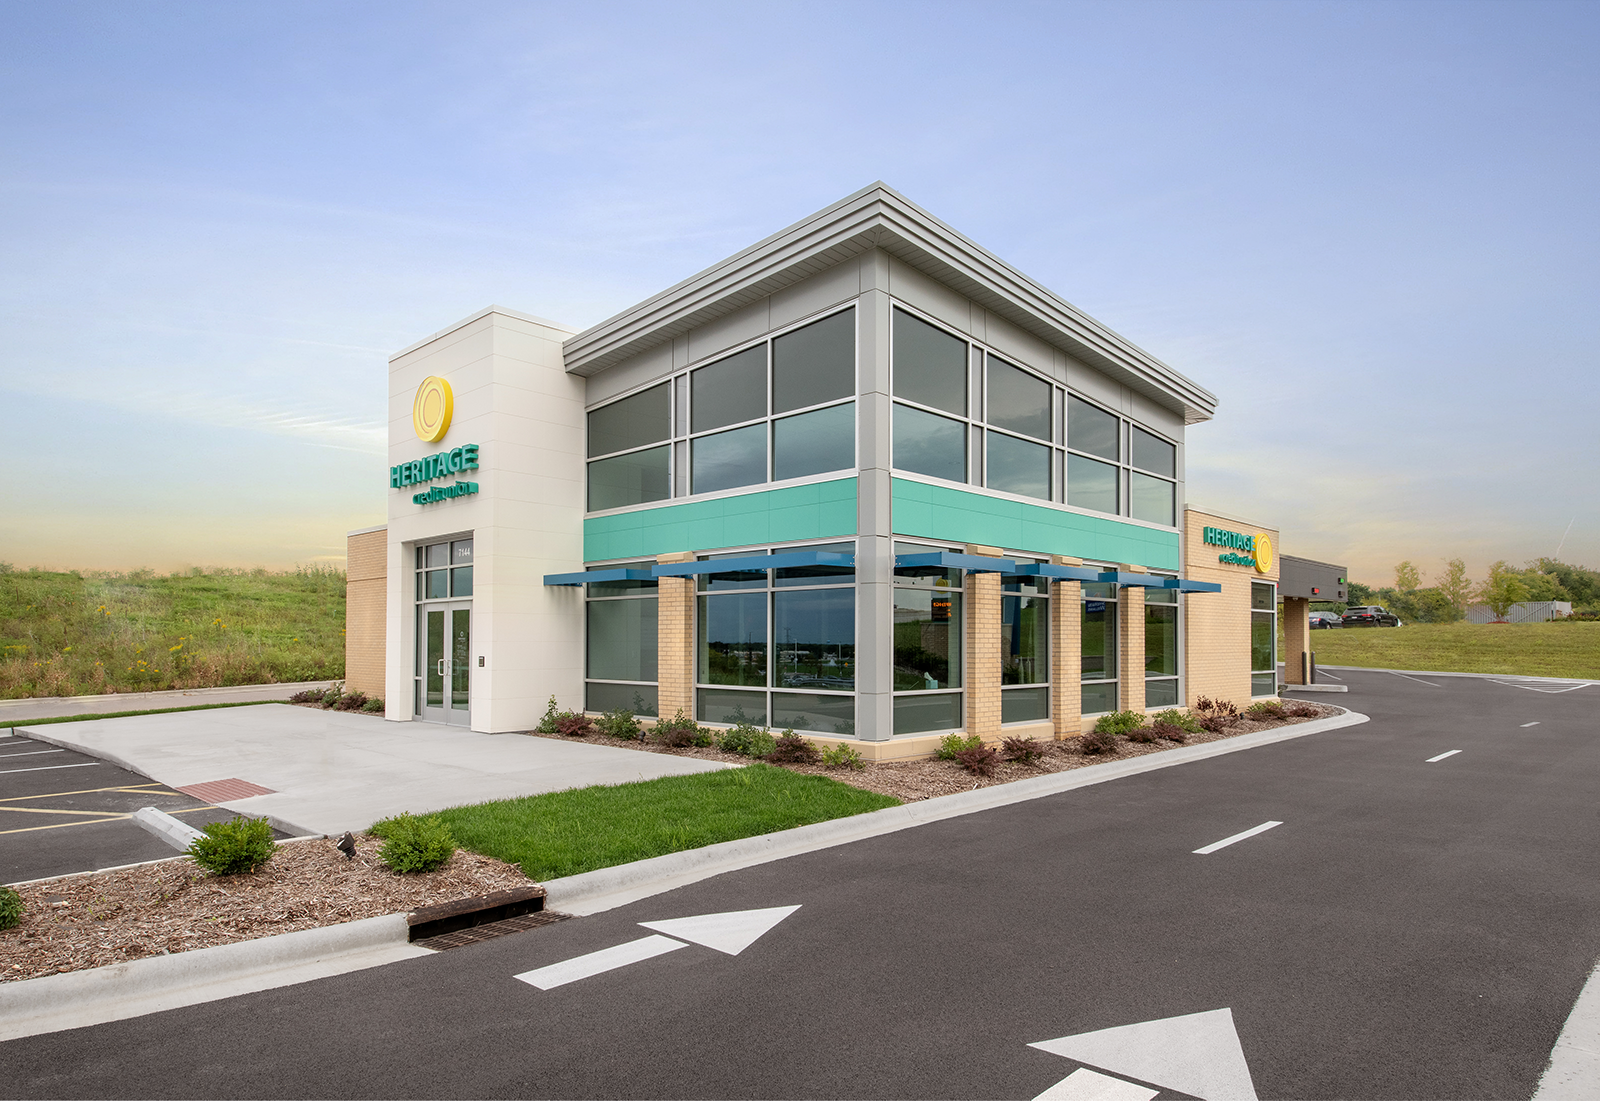 New credit union branch located in Illinois